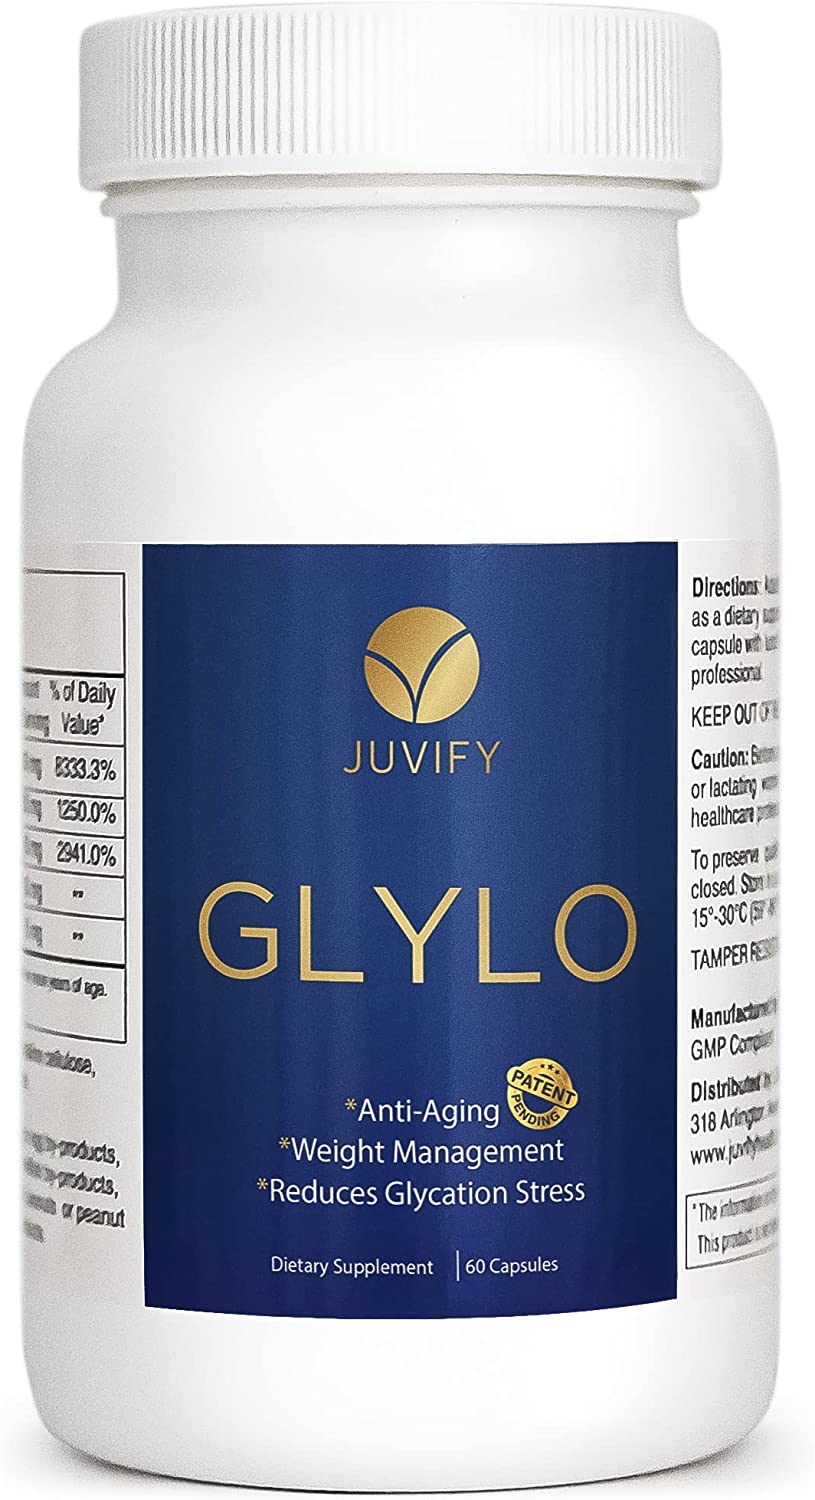 Juvify GLYLO - Scientifically formulated Healthy Aging & Weight Management Pill - Reduces Cravings & Menopause Related Weight - 60 Caps